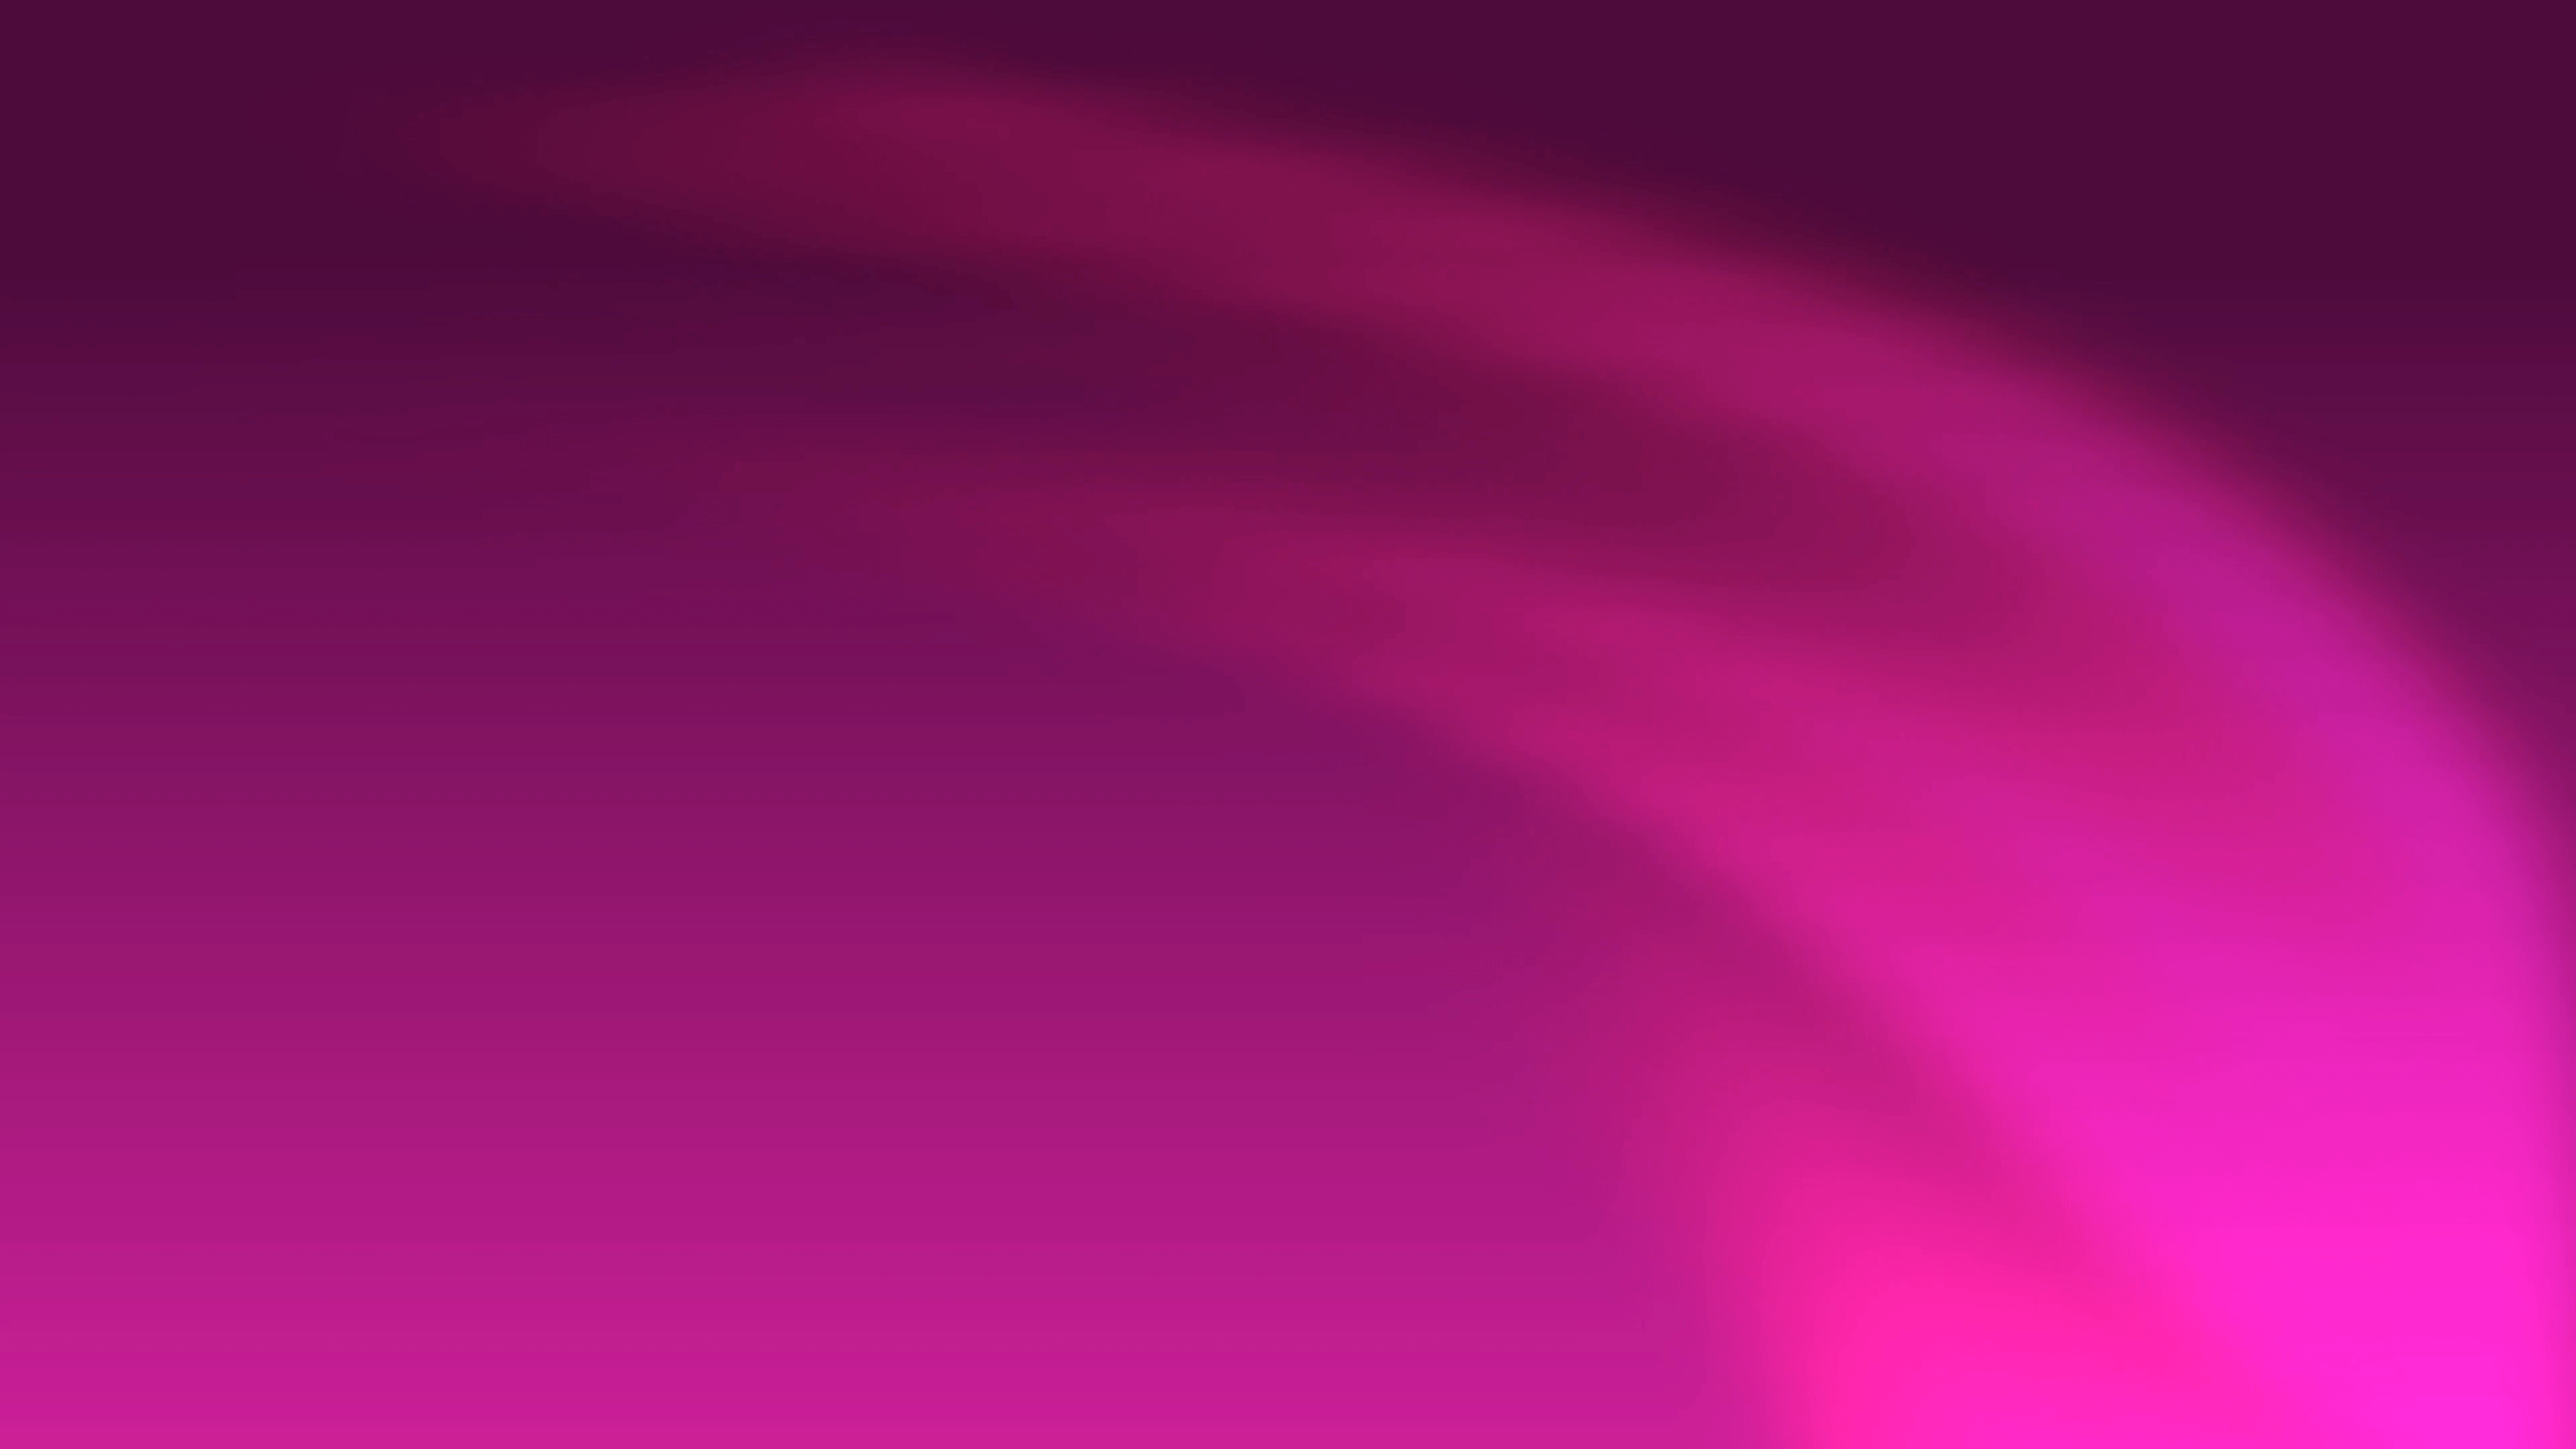 Pink abstract curves of light spread out and fill a dark background